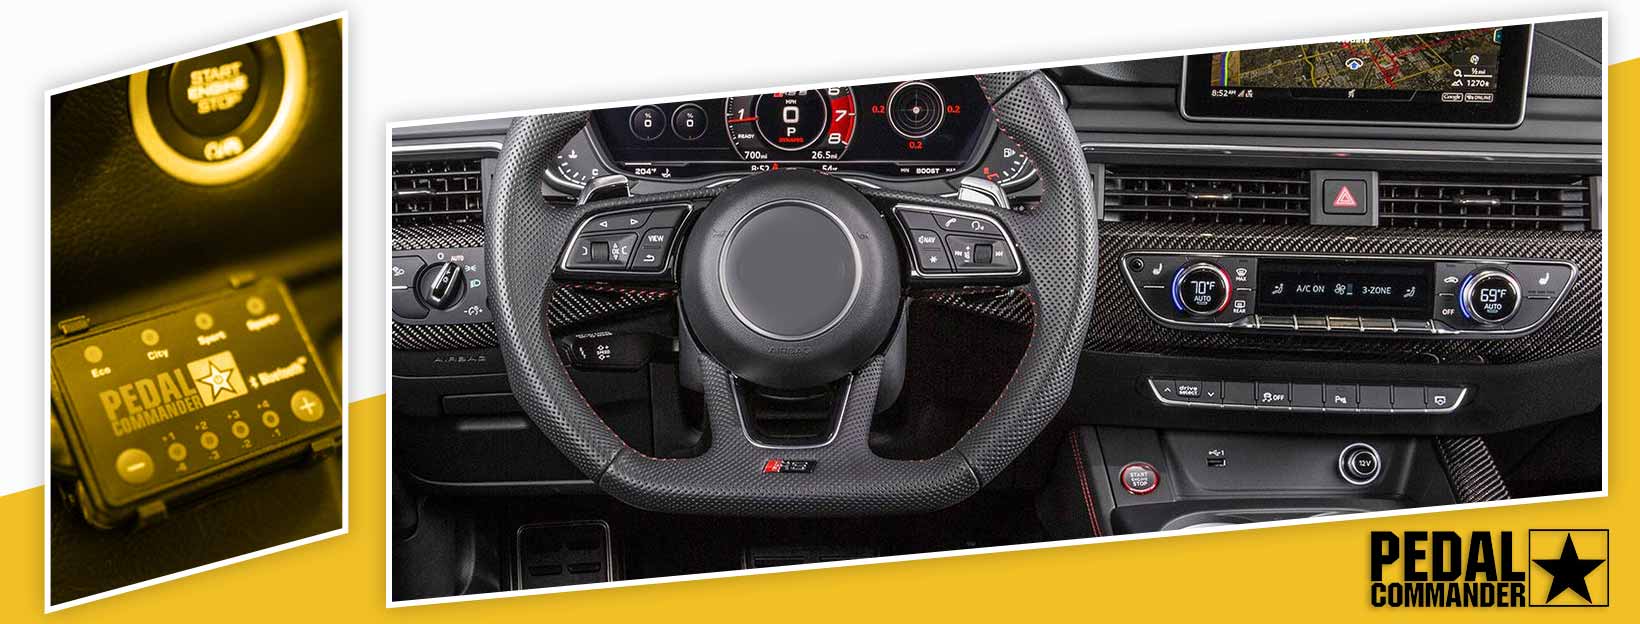 Pedal Commander for Audi RS5 - interior